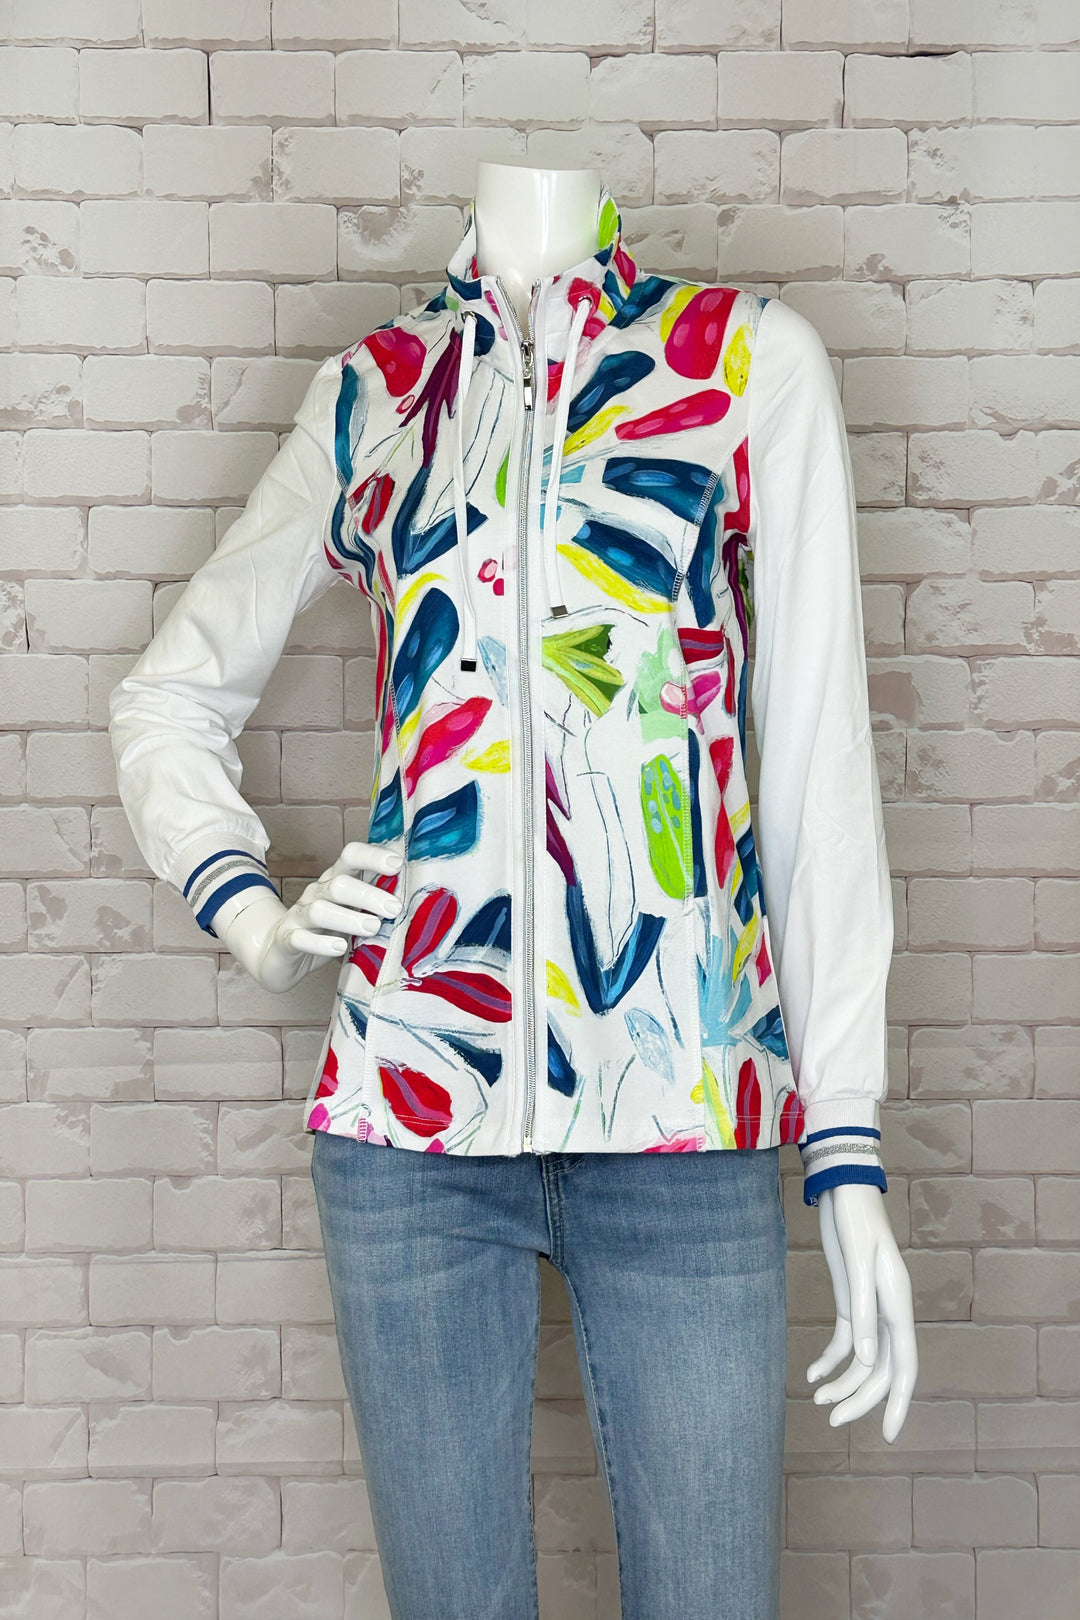 This stimulating Tropical Trace Zip Jacket features contrast sleeves and cuffs, front zipper, two front pockets, a drawstring hood and full length sleeves.